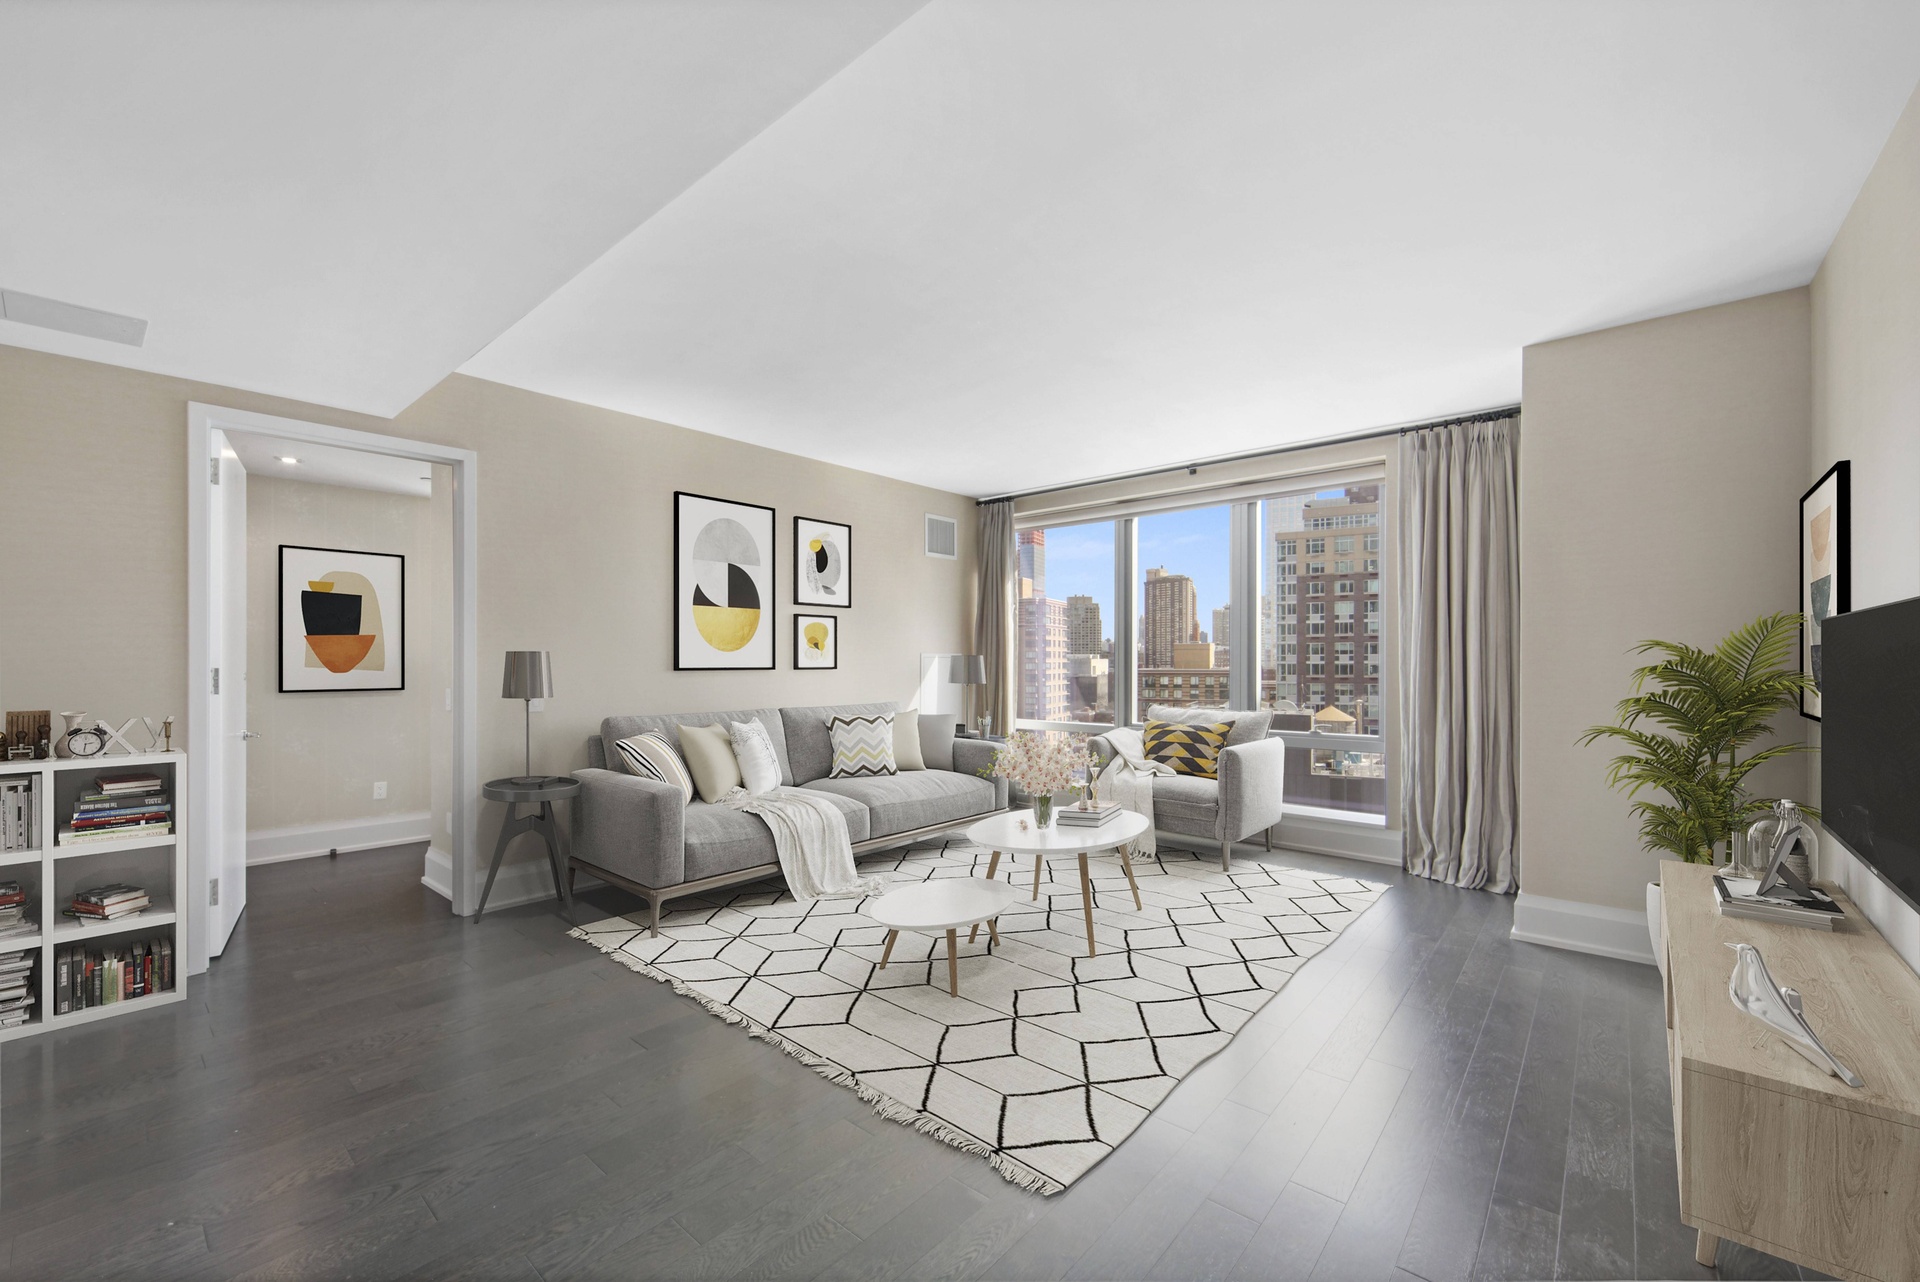 50 Riverside Boulevard 19-F, Lincoln Square, Upper West Side, NYC - 2 Bedrooms  
2.5 Bathrooms  
4 Rooms - 